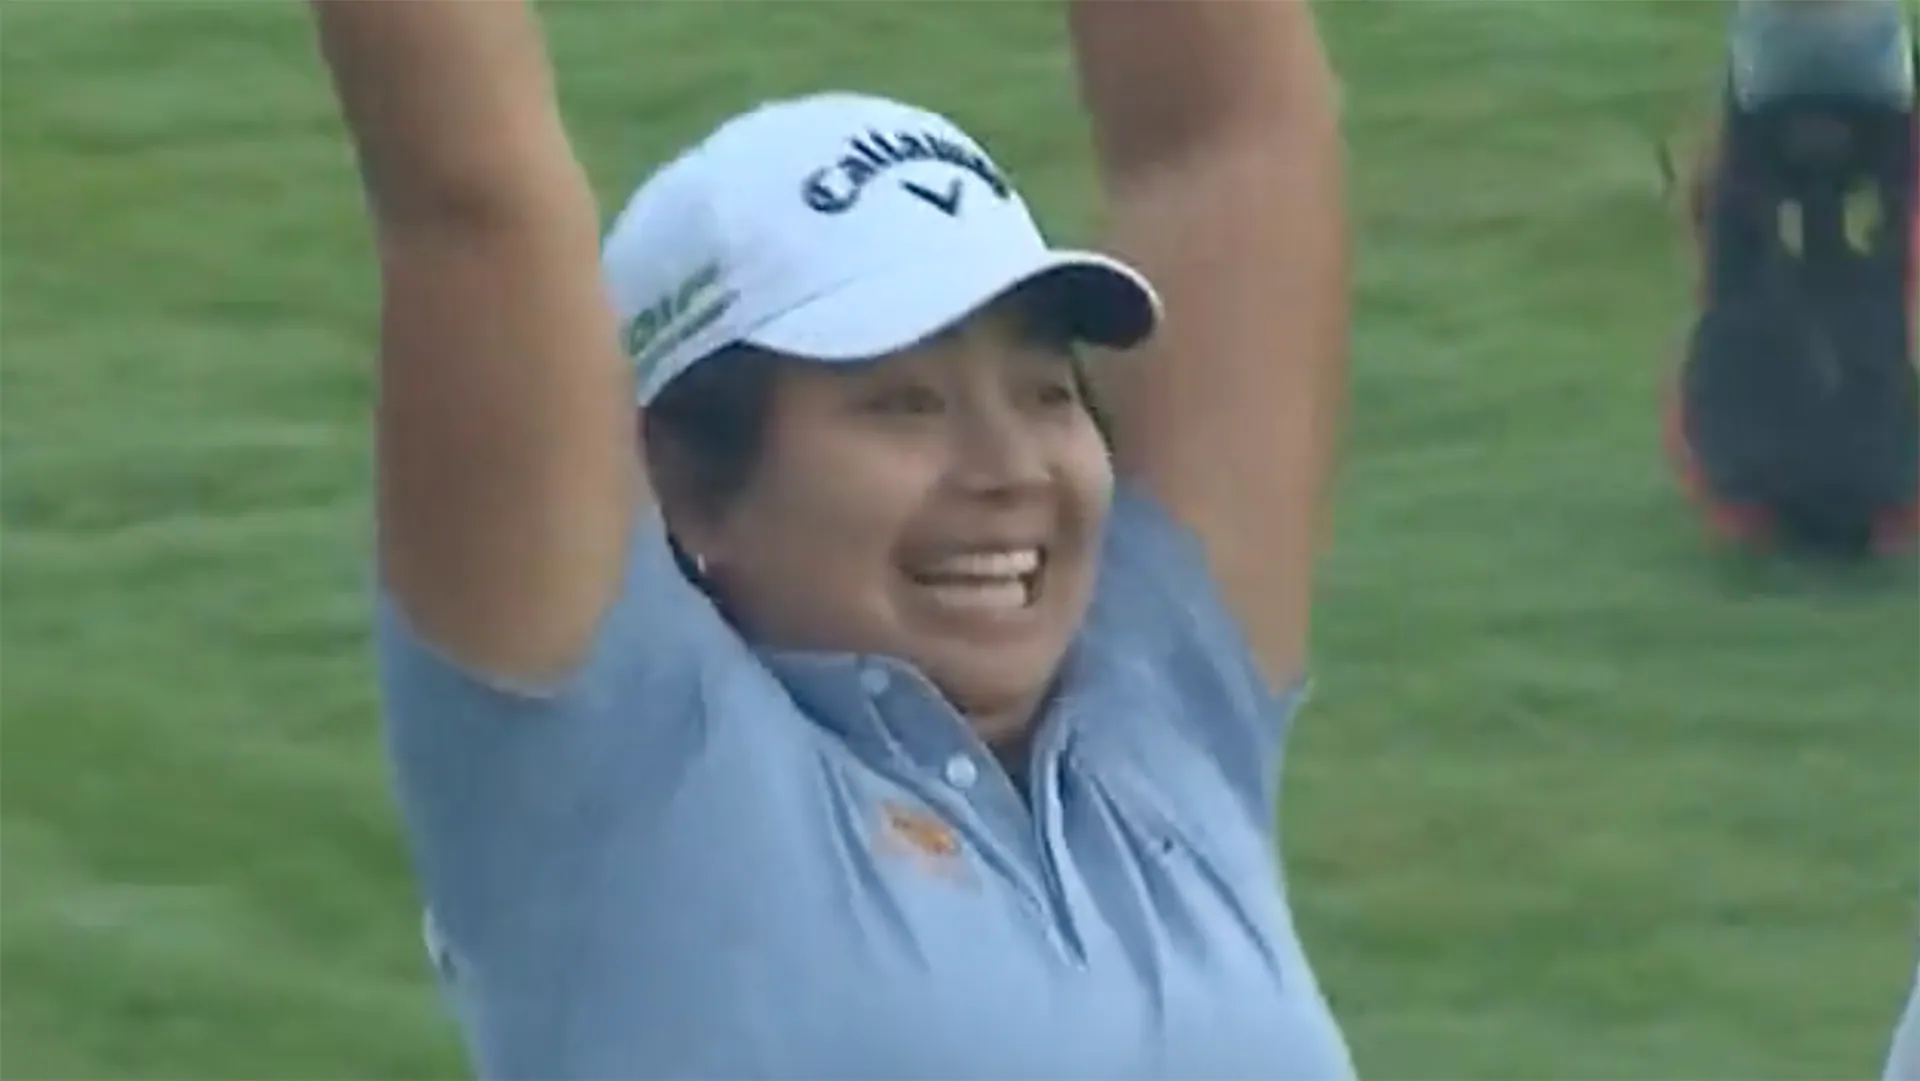 No speed limit: Another ace, another Lamborghini won at LPGA event